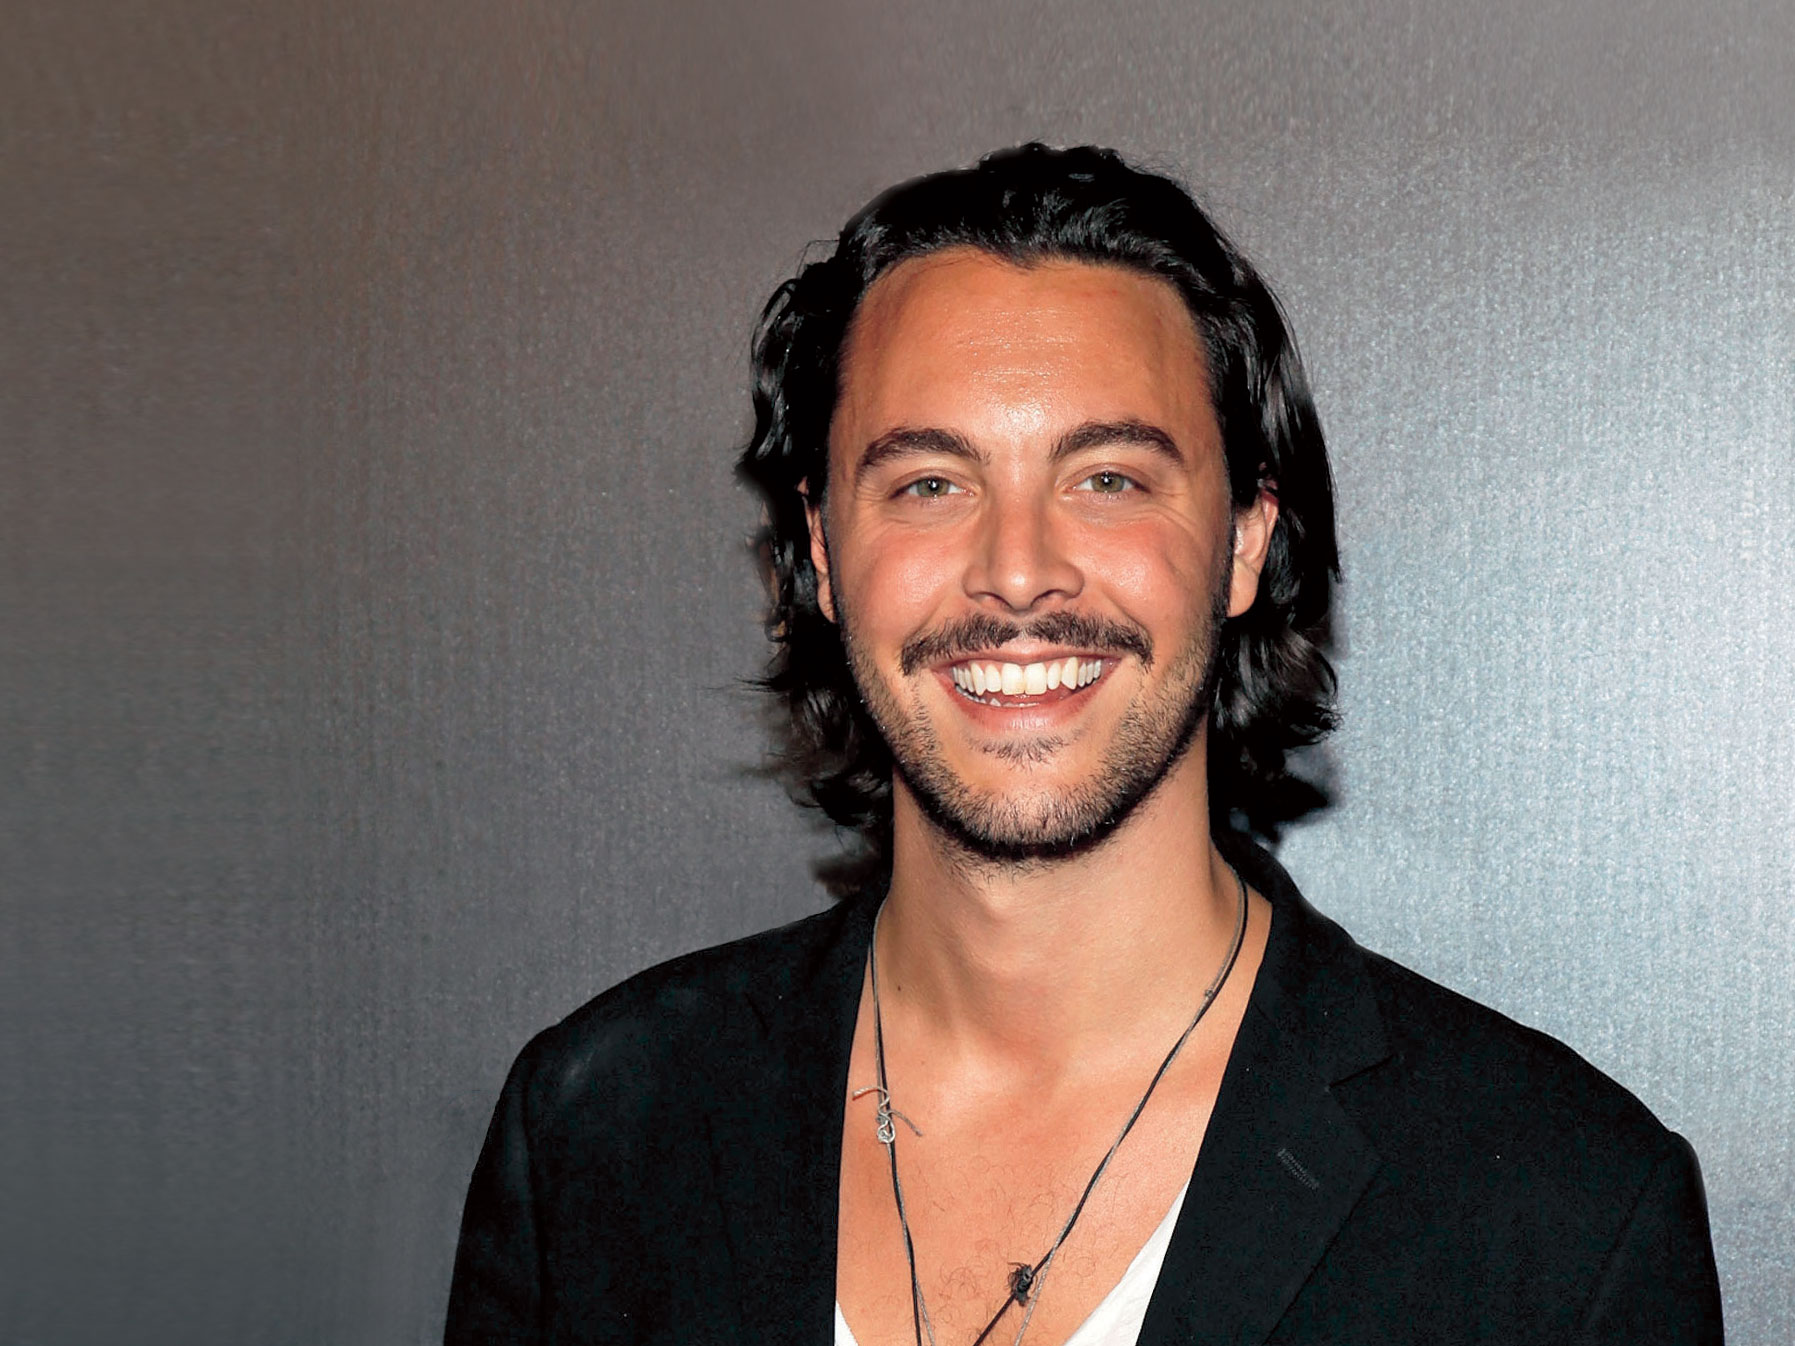 Boardwalk Empire’s Jack Huston might be The Crow